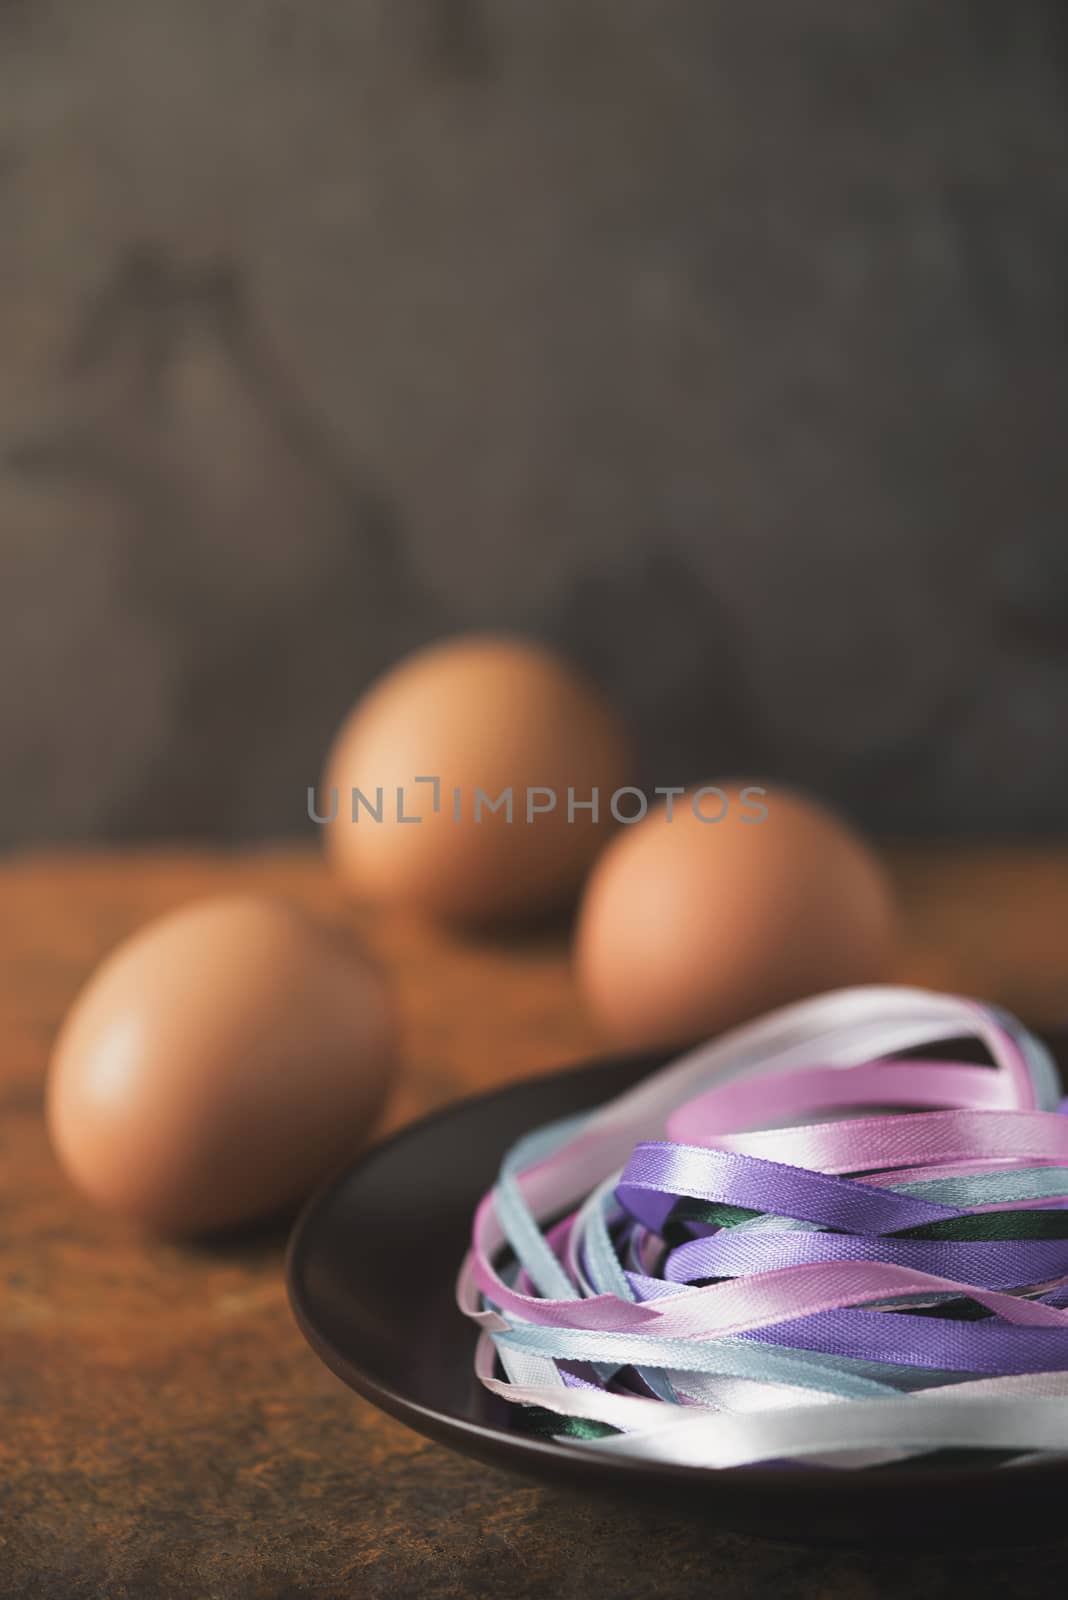 Blue ribbons in the plate with blurred eggs vertical